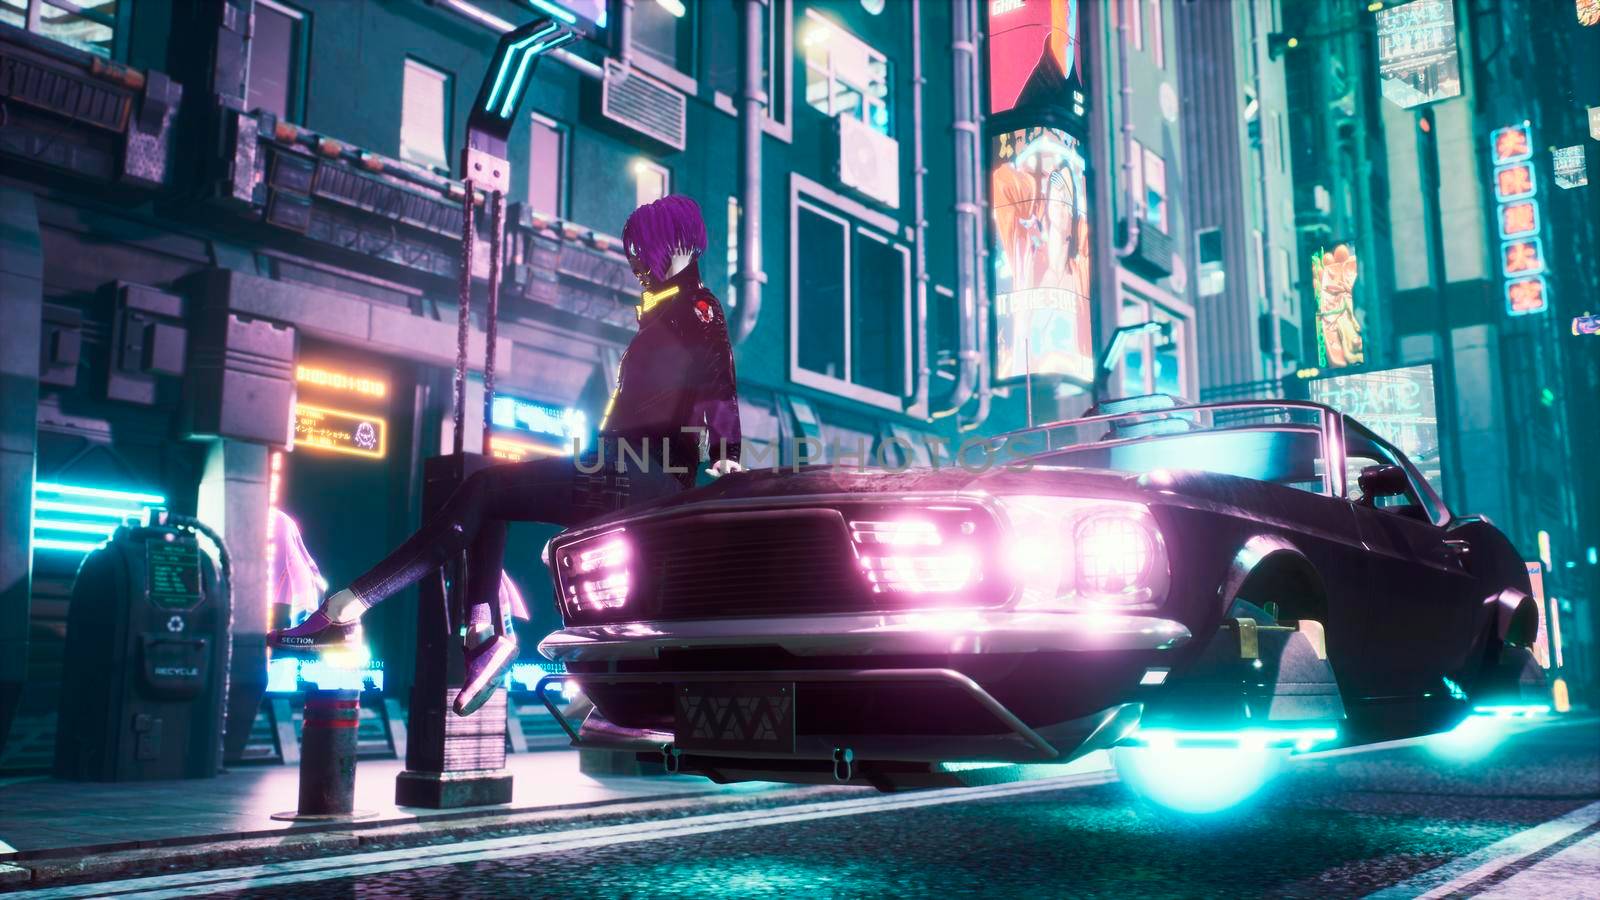 The girl relaxes while sitting on a futuristic car standing on the neon street of the city of the future. View of an future fiction city. Sci-fi cyber world concept.